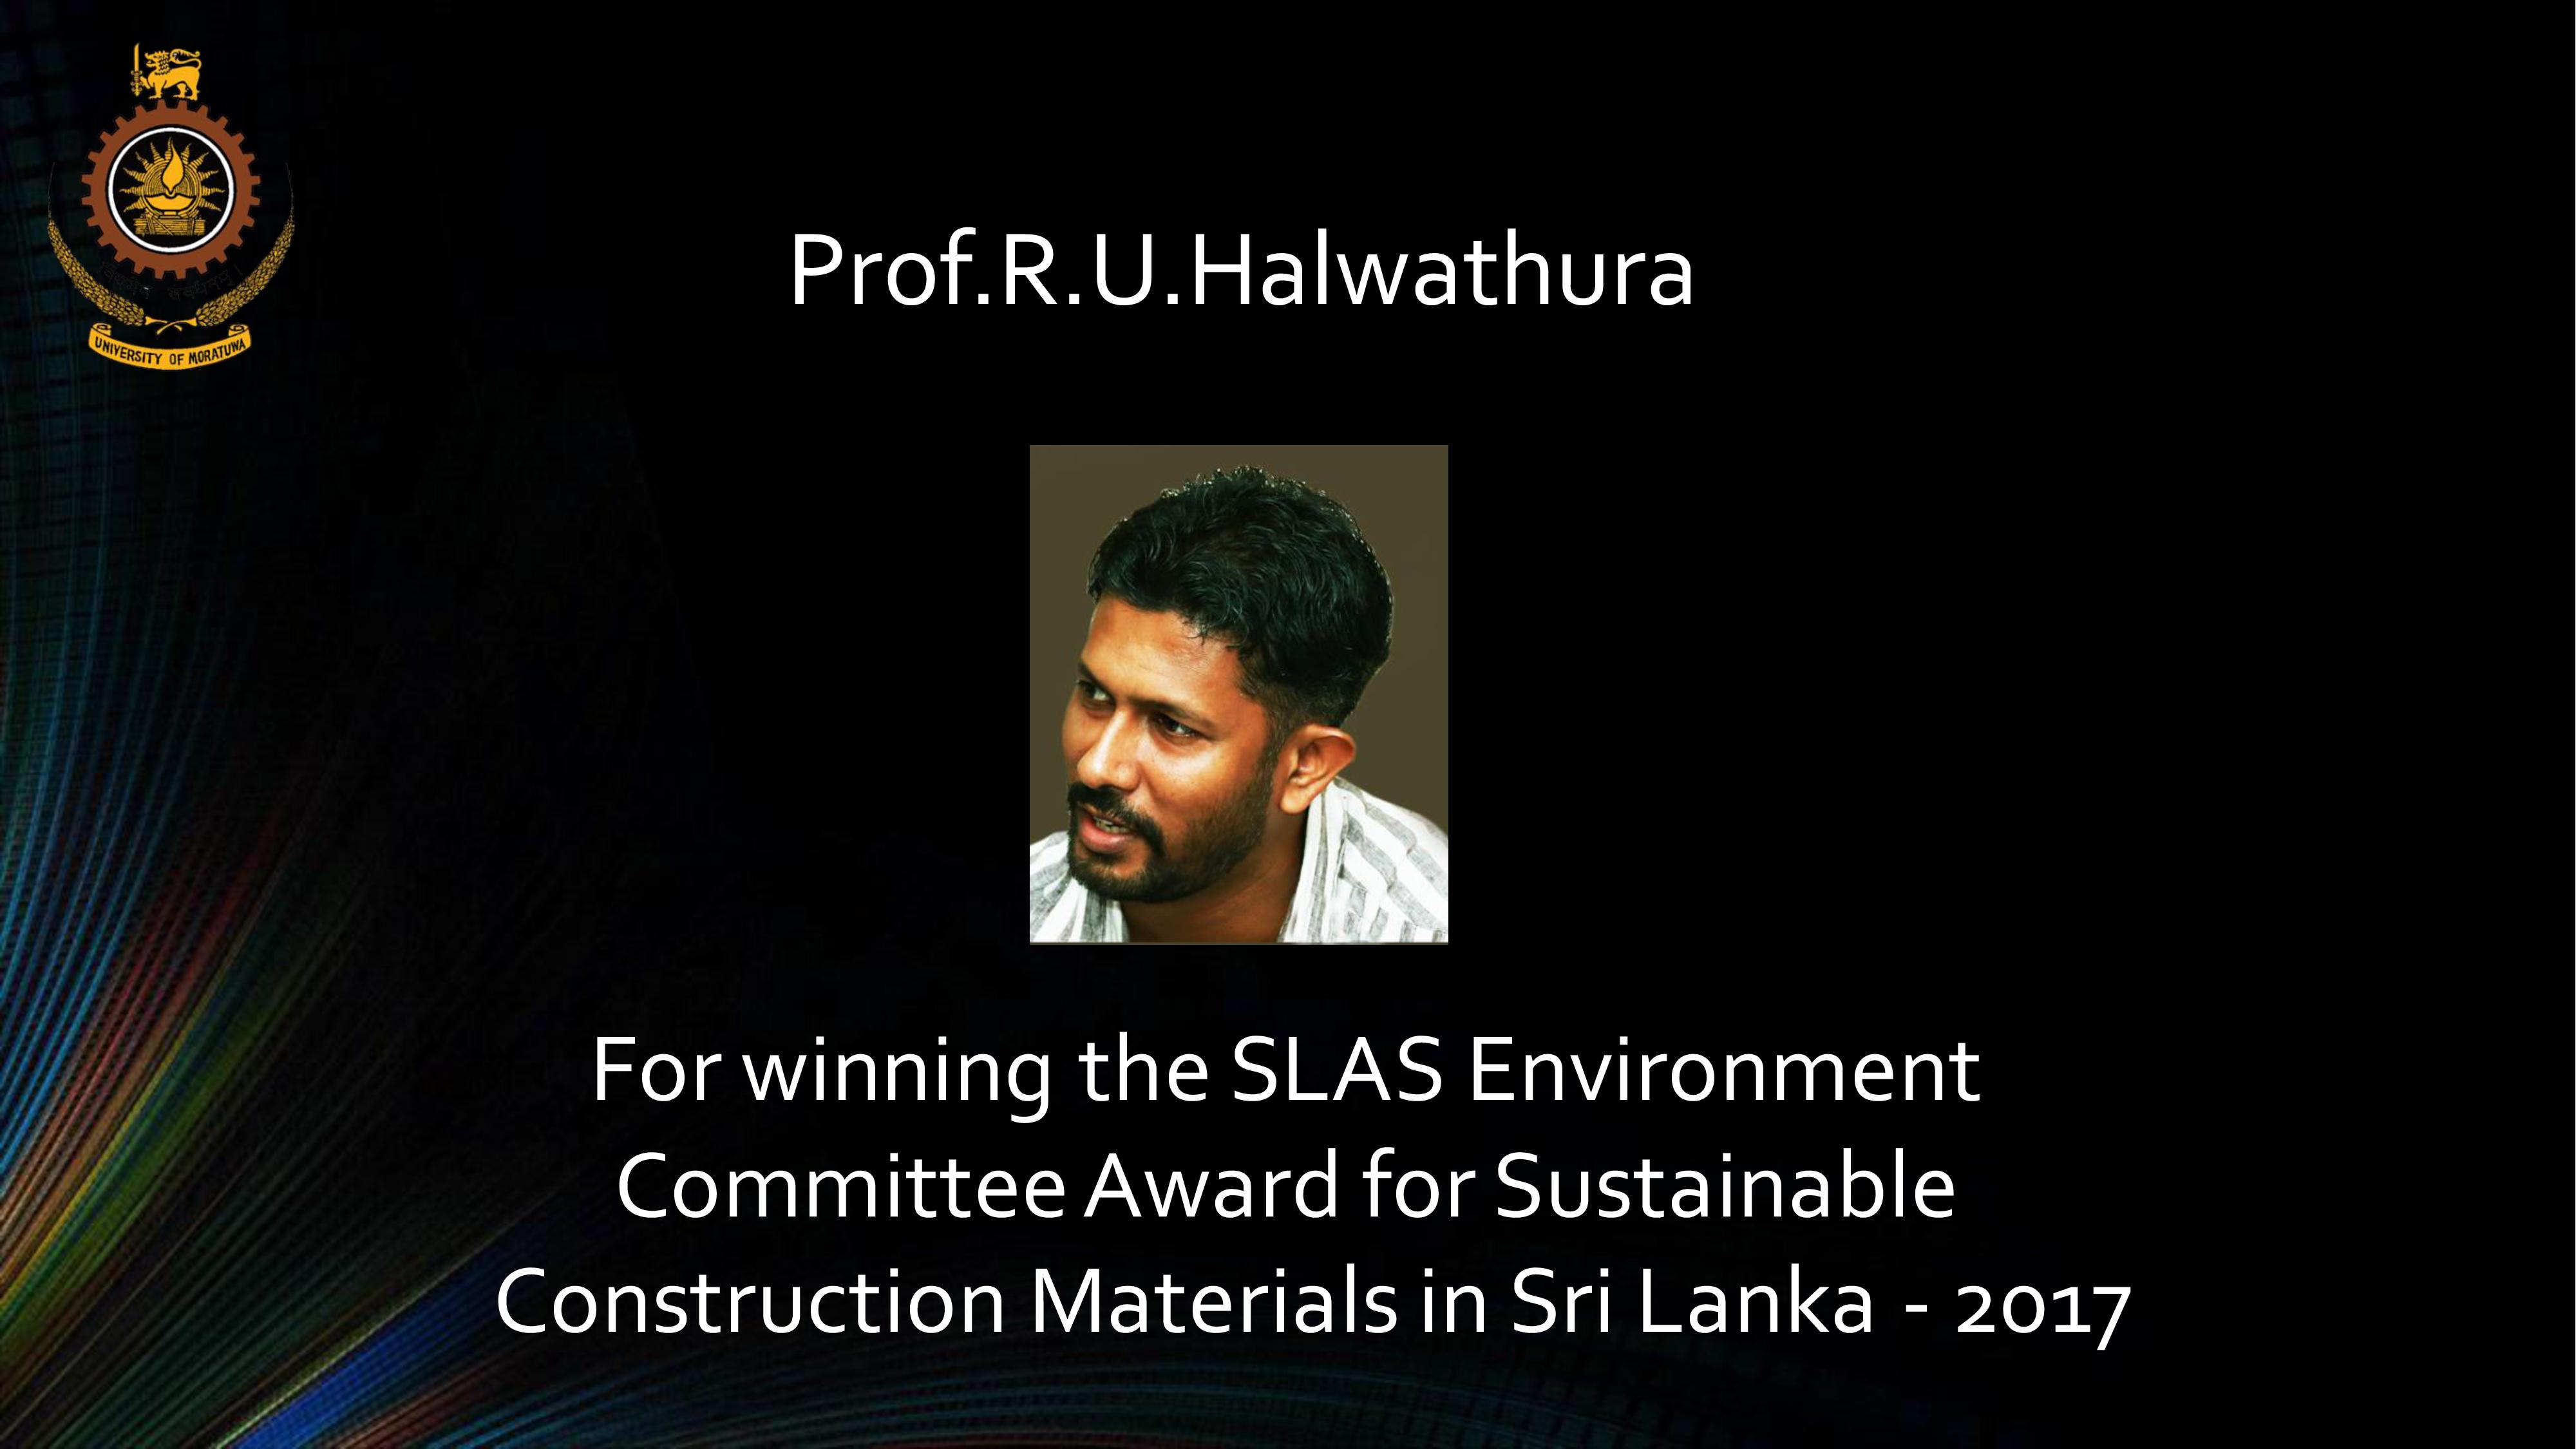 Winning the SLAS Environment Committee Award for Sustainable Construction Materials in Sri Lanka